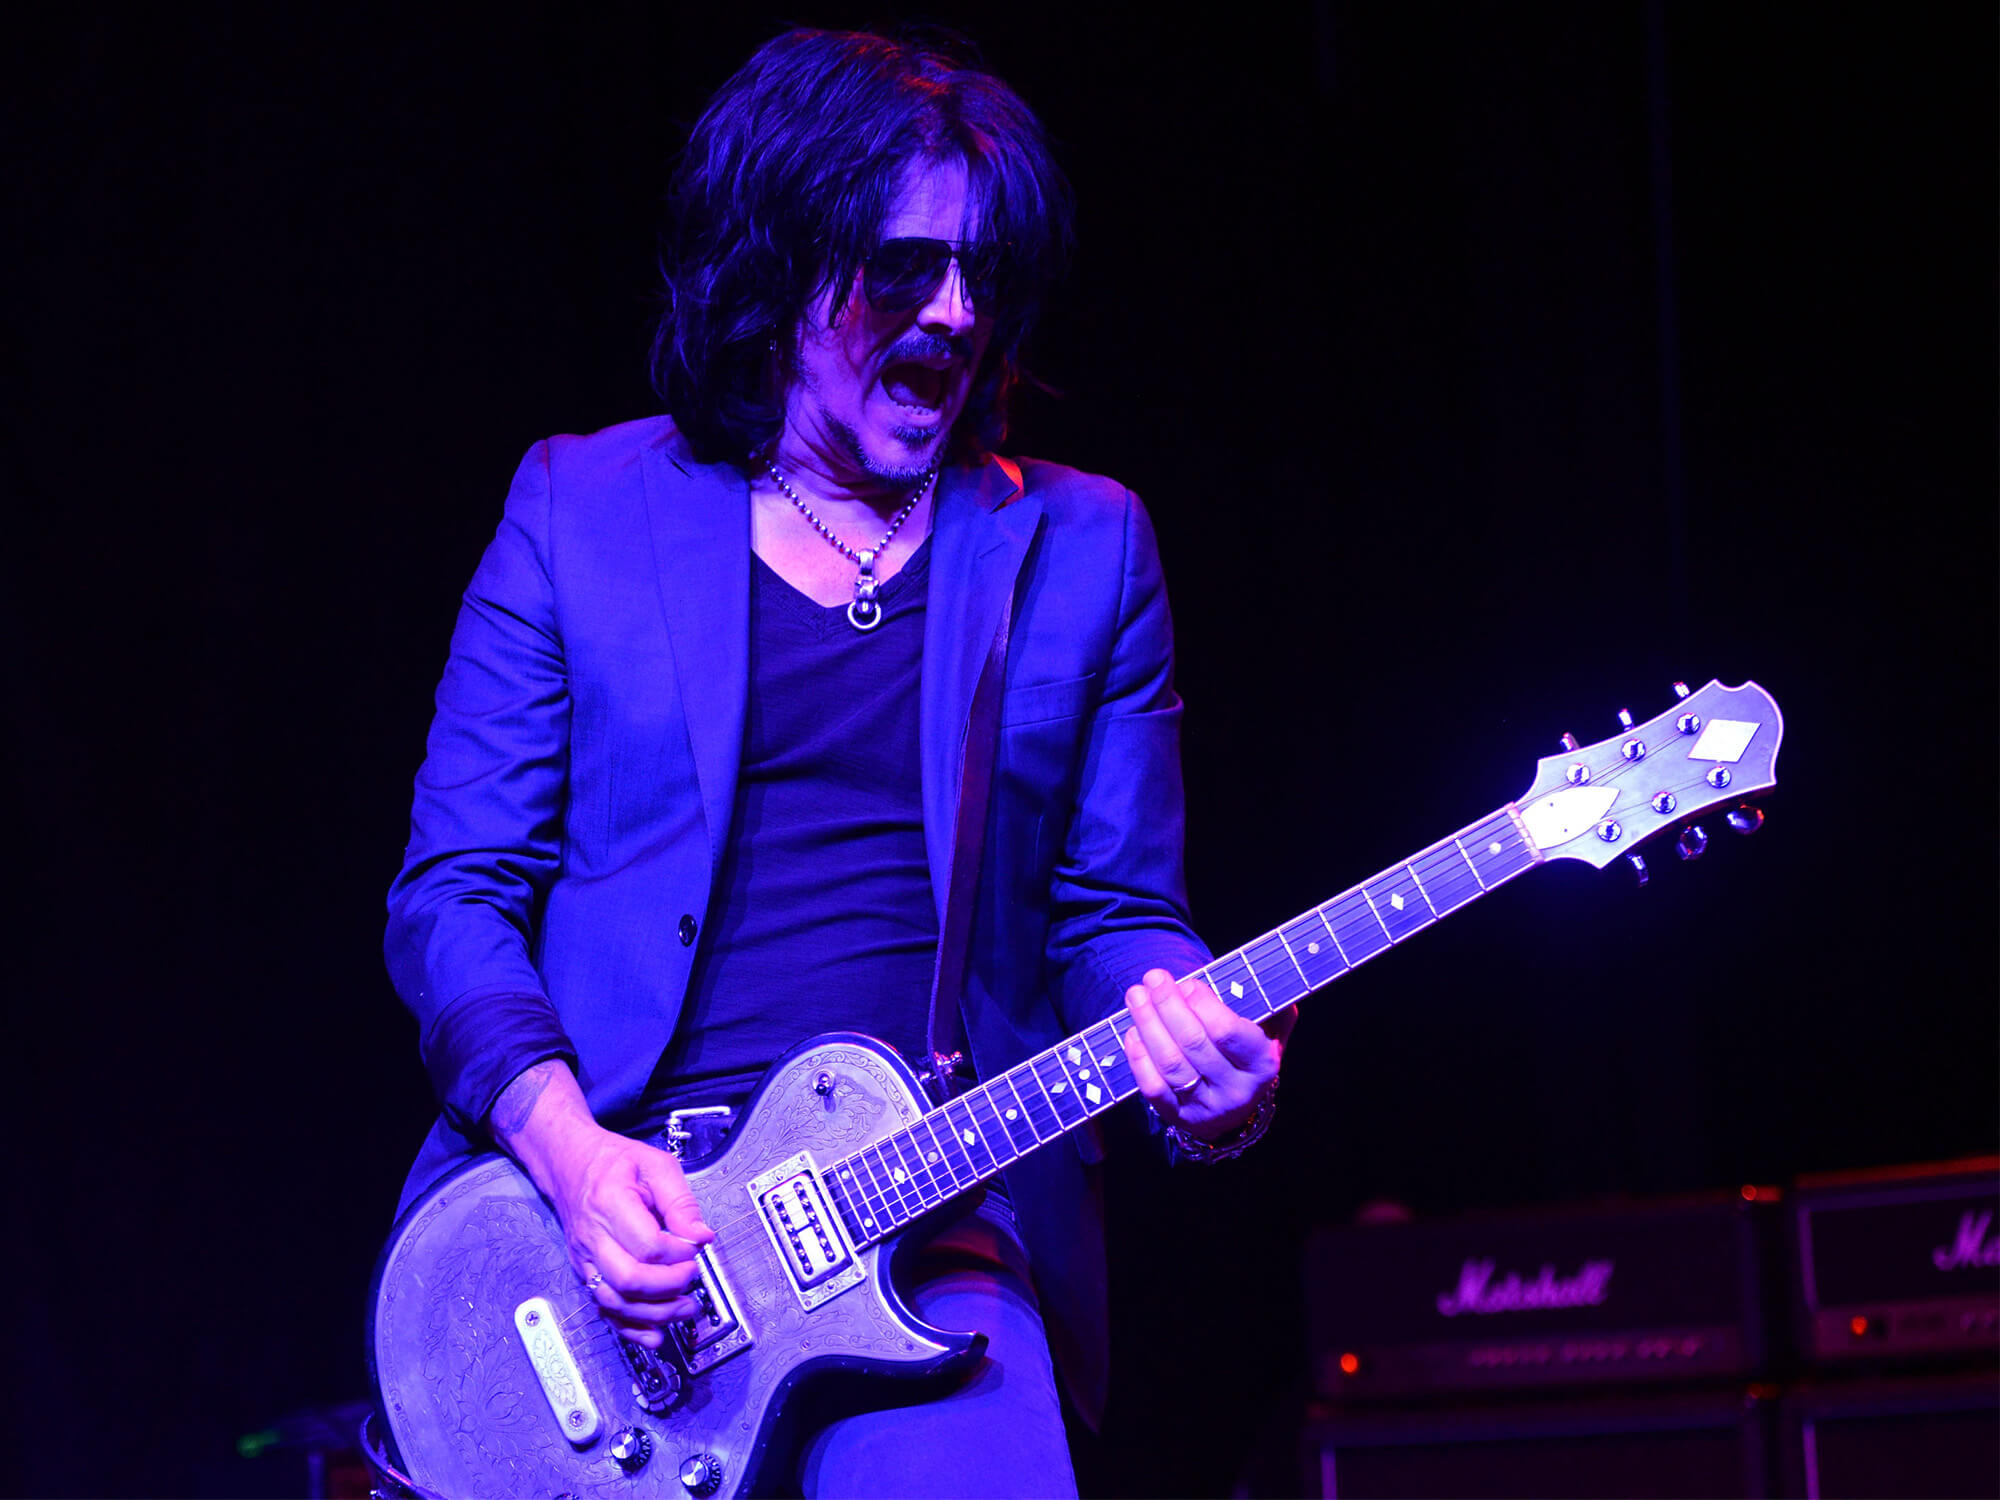 Gilby Clarke playing guitar under purple lighting. He's wearing shades and has his mouth open as if singing.